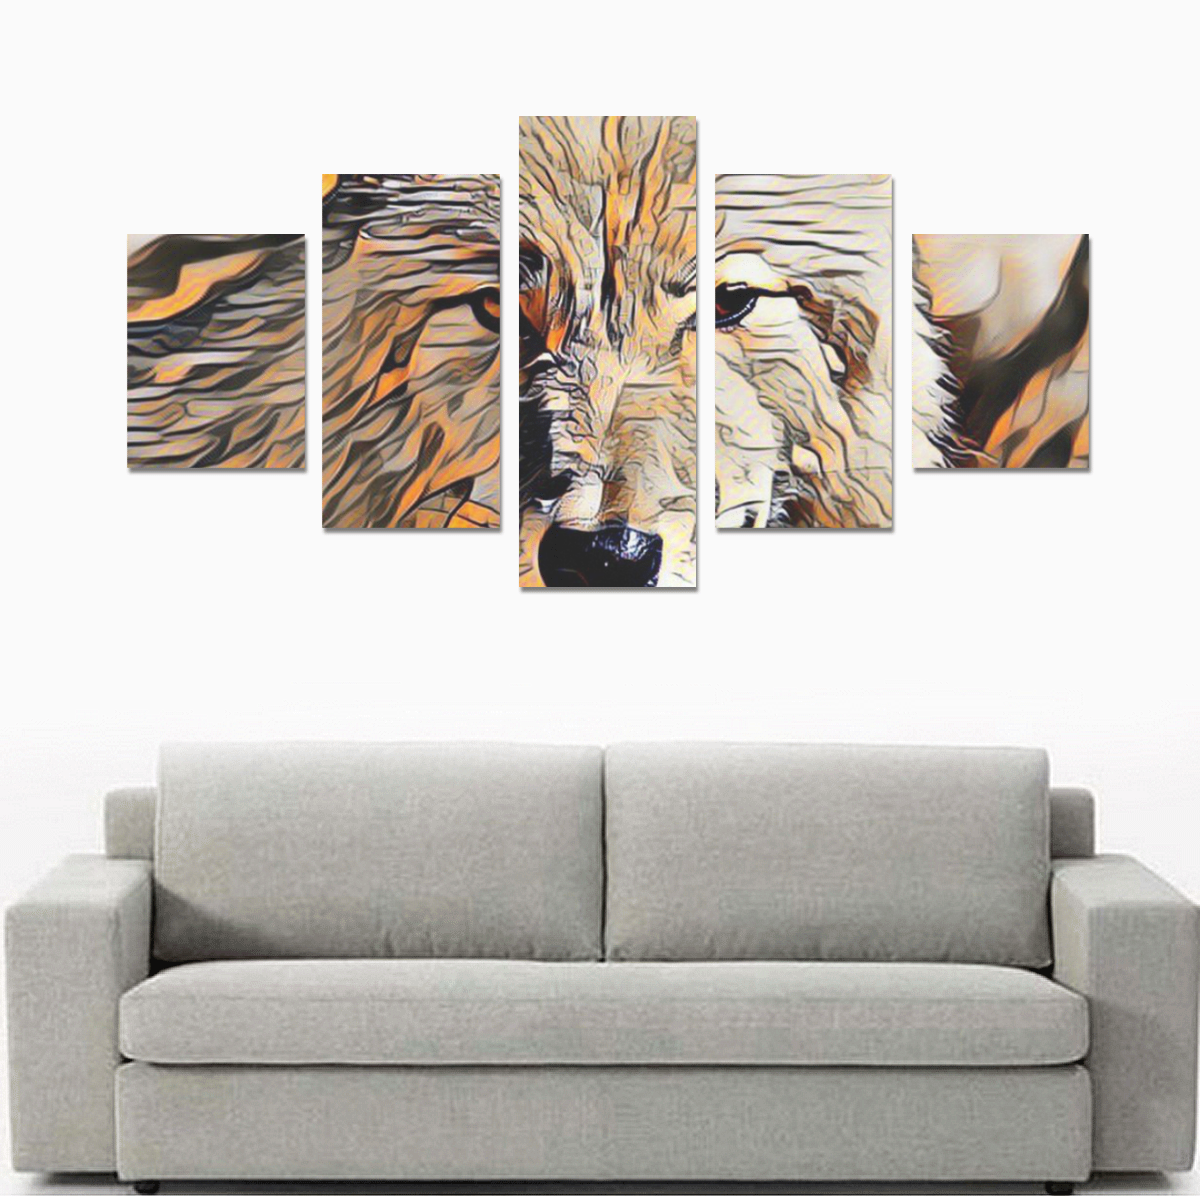 ArtAnimal Wolf by JamColors Canvas Print Sets B (No Frame)